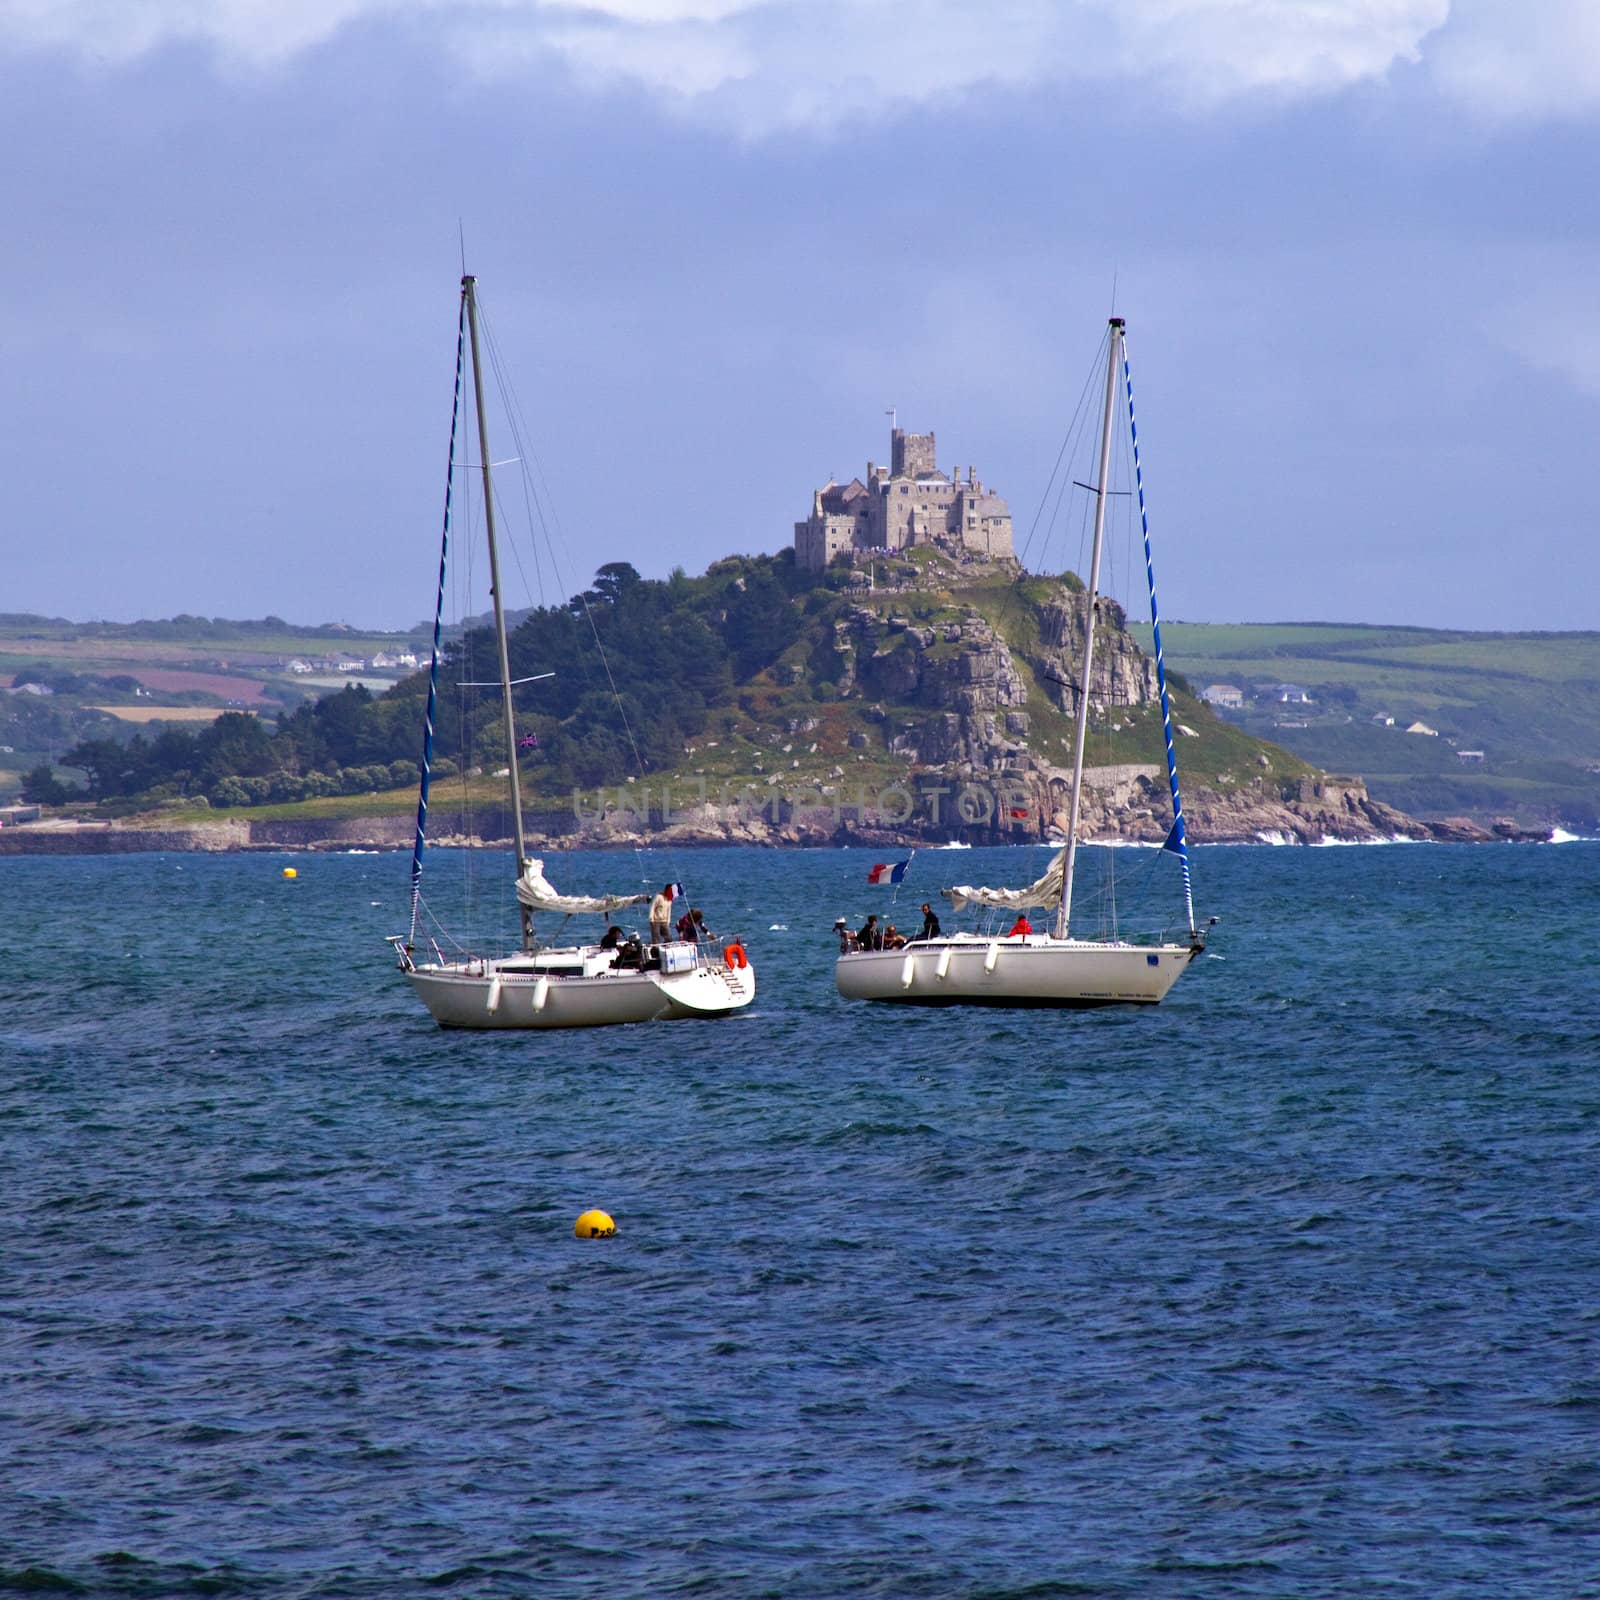 A view of the magnificent St. Michael's Mount in Cornwall.